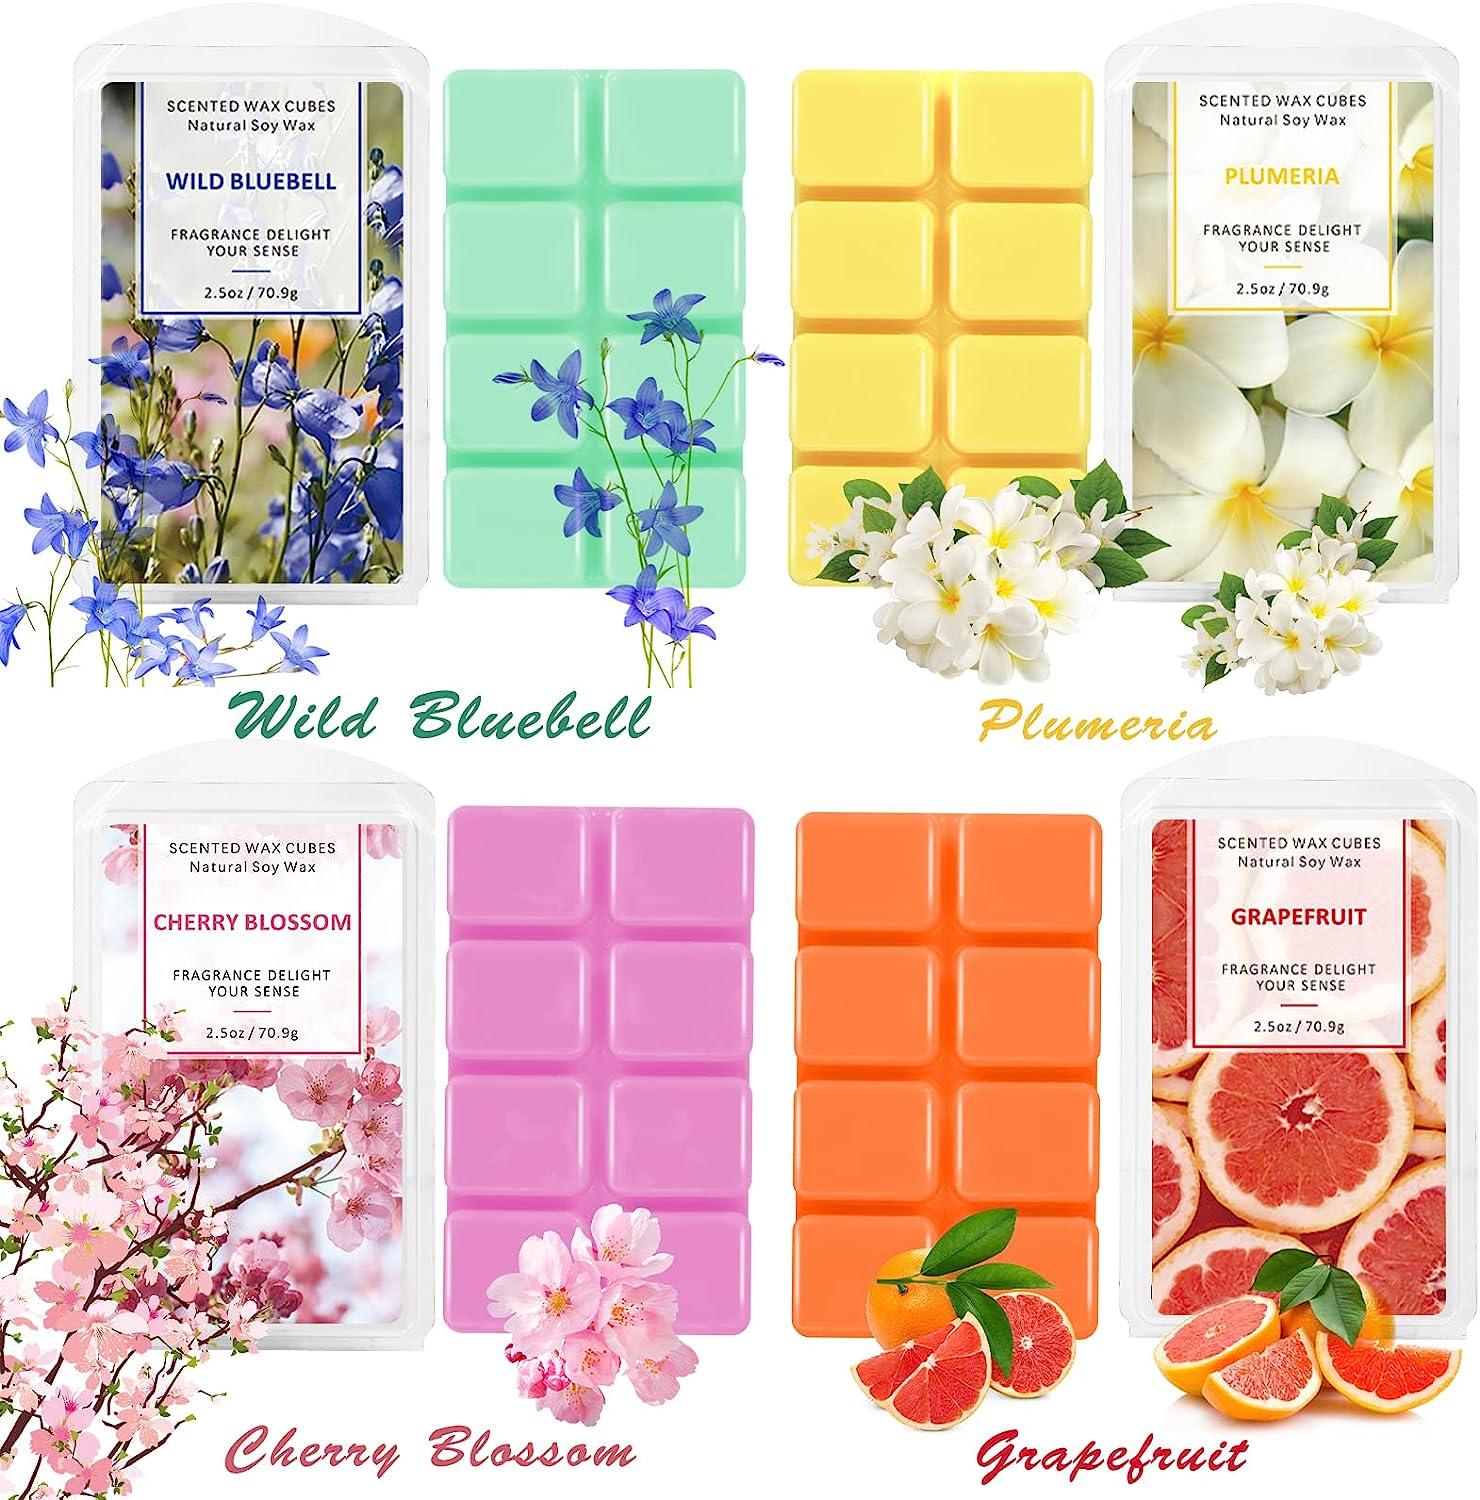 Wax Melts Wax Cubes, Scented Soy Wax Melts, Mothers Day Gifts Deco Wax Melts  for Home, Cherry Blossom, Plumeria, Cotton, Wild Bluebell, Earl Grey,  Bamboo Forest, Nectarine Blossom&Honey, Grapefruit Cherry Blossom, Plumeria